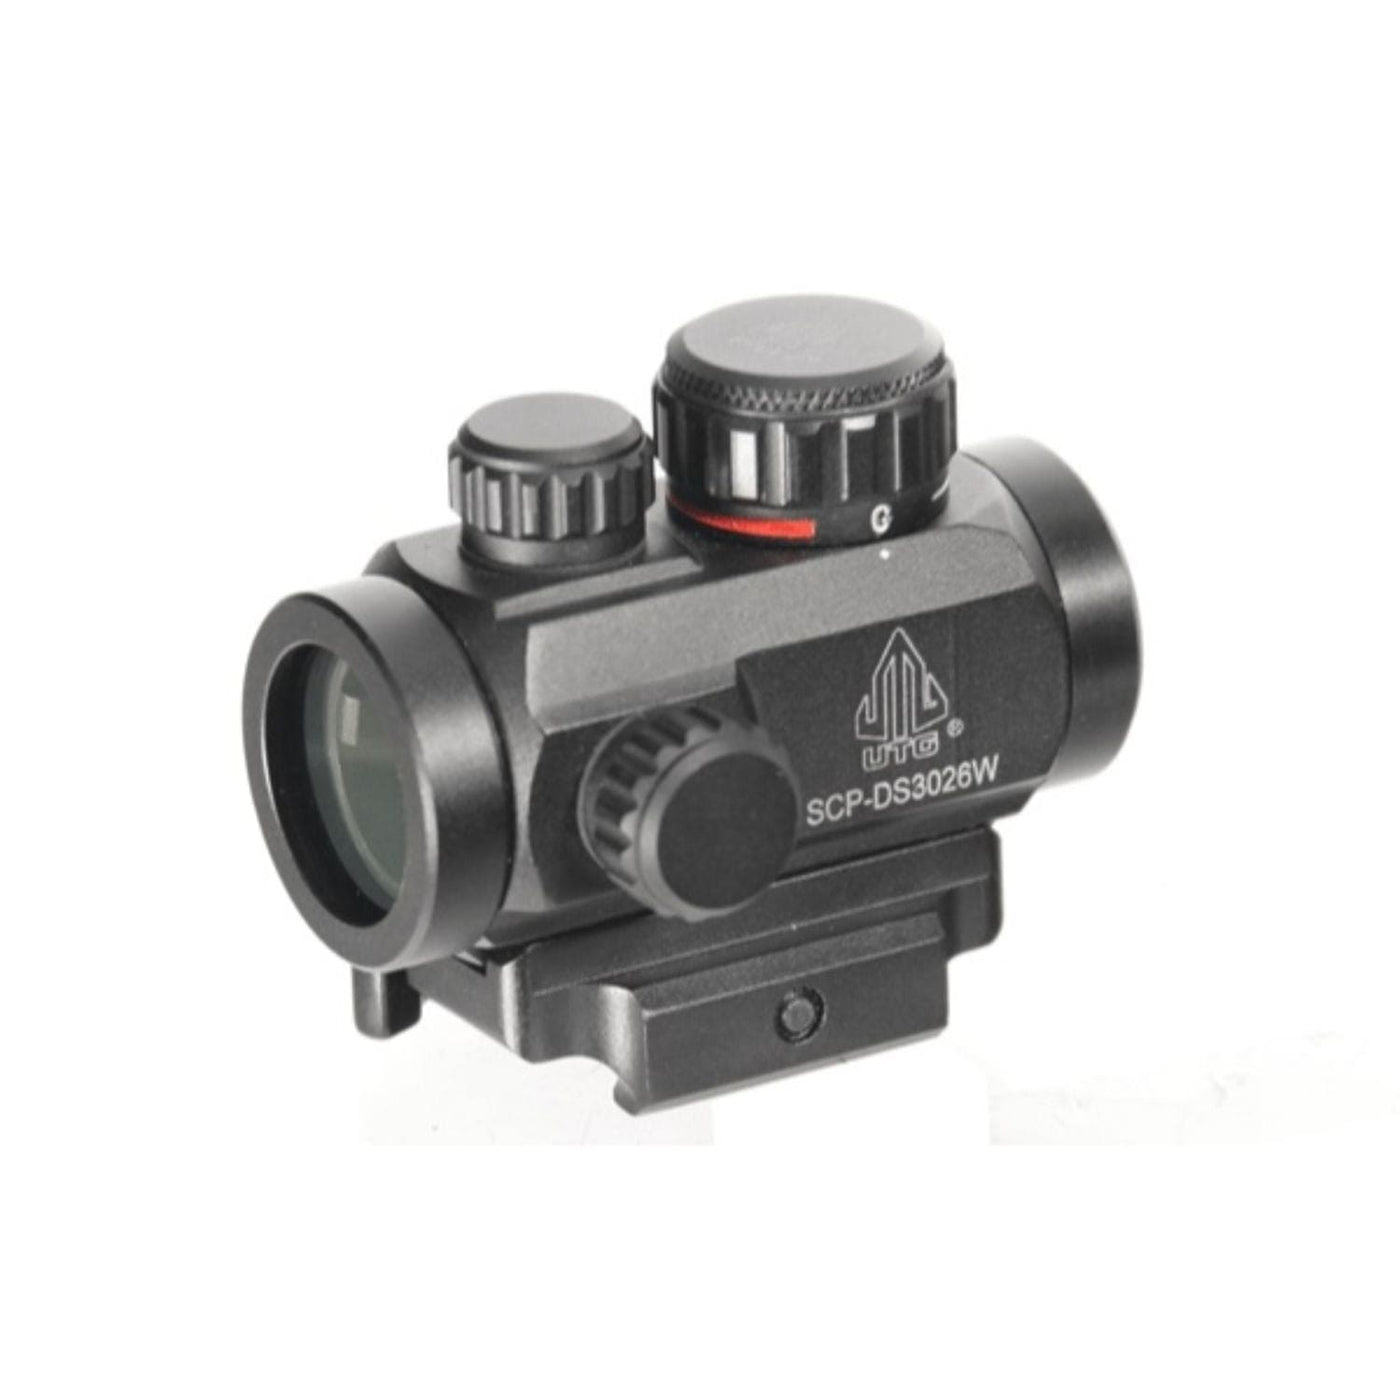 Leapers Leapers UTG 2.6in ITA Red Grn CQB Micro Dot w Integ QD Mount Optics And Sights